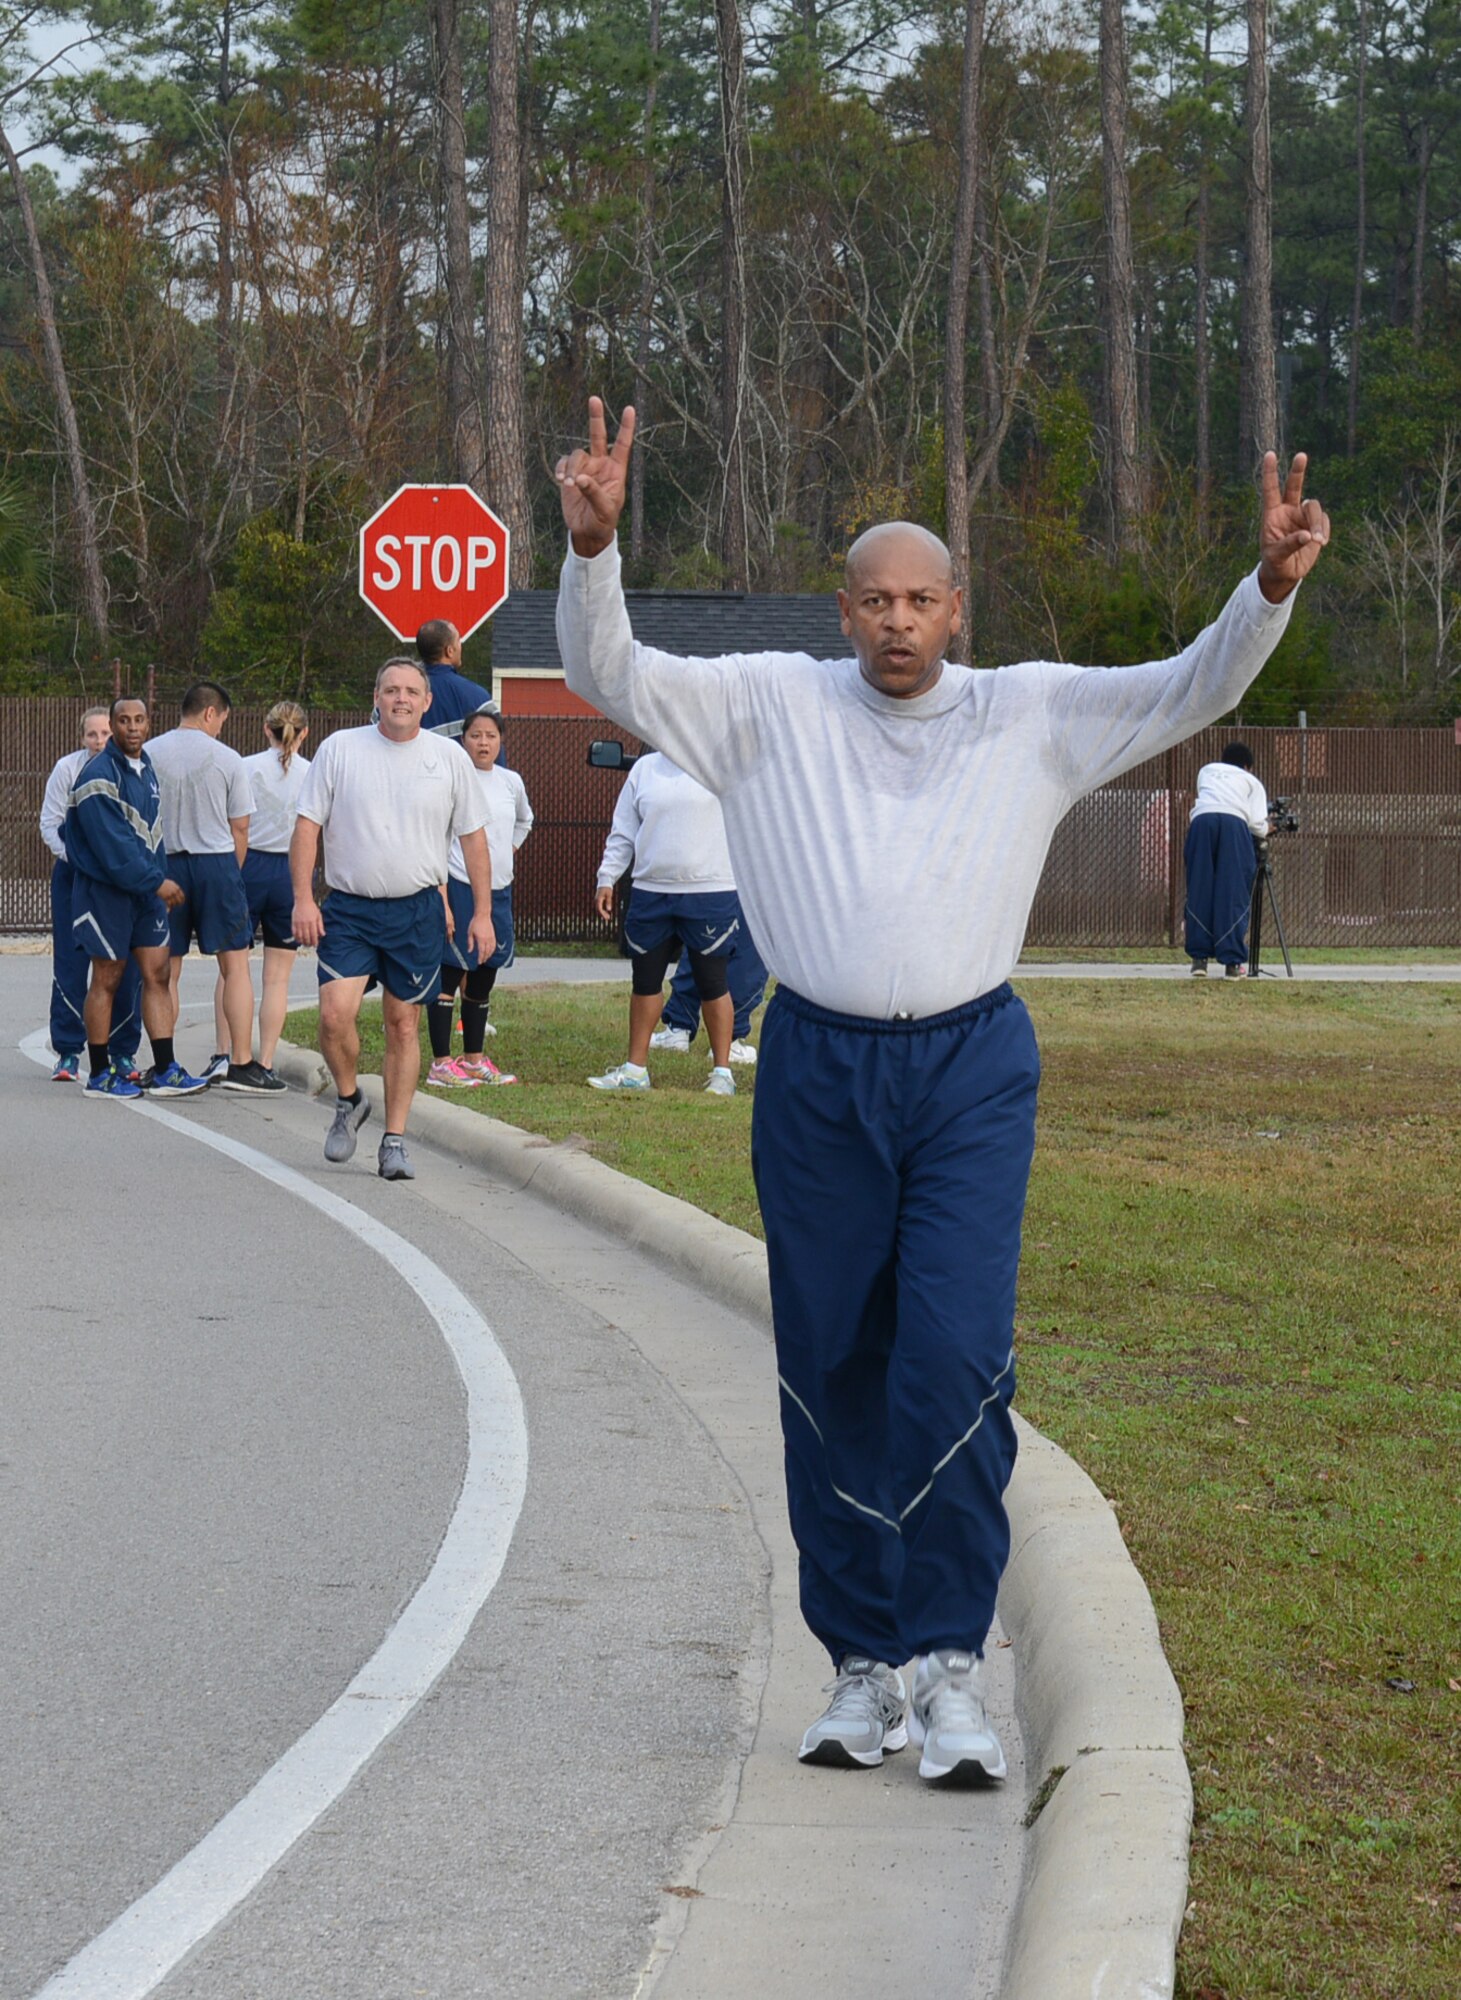 Chief Master Sgt. Kerry Henderson, Air Force Special Operations Command communications and information chief, celebrates after completing a 5K run at Hurlburt Field, Fla., Feb. 3, 2017. (U.S. Air Force photo/Staff Sgt. Melanie Holochwost)